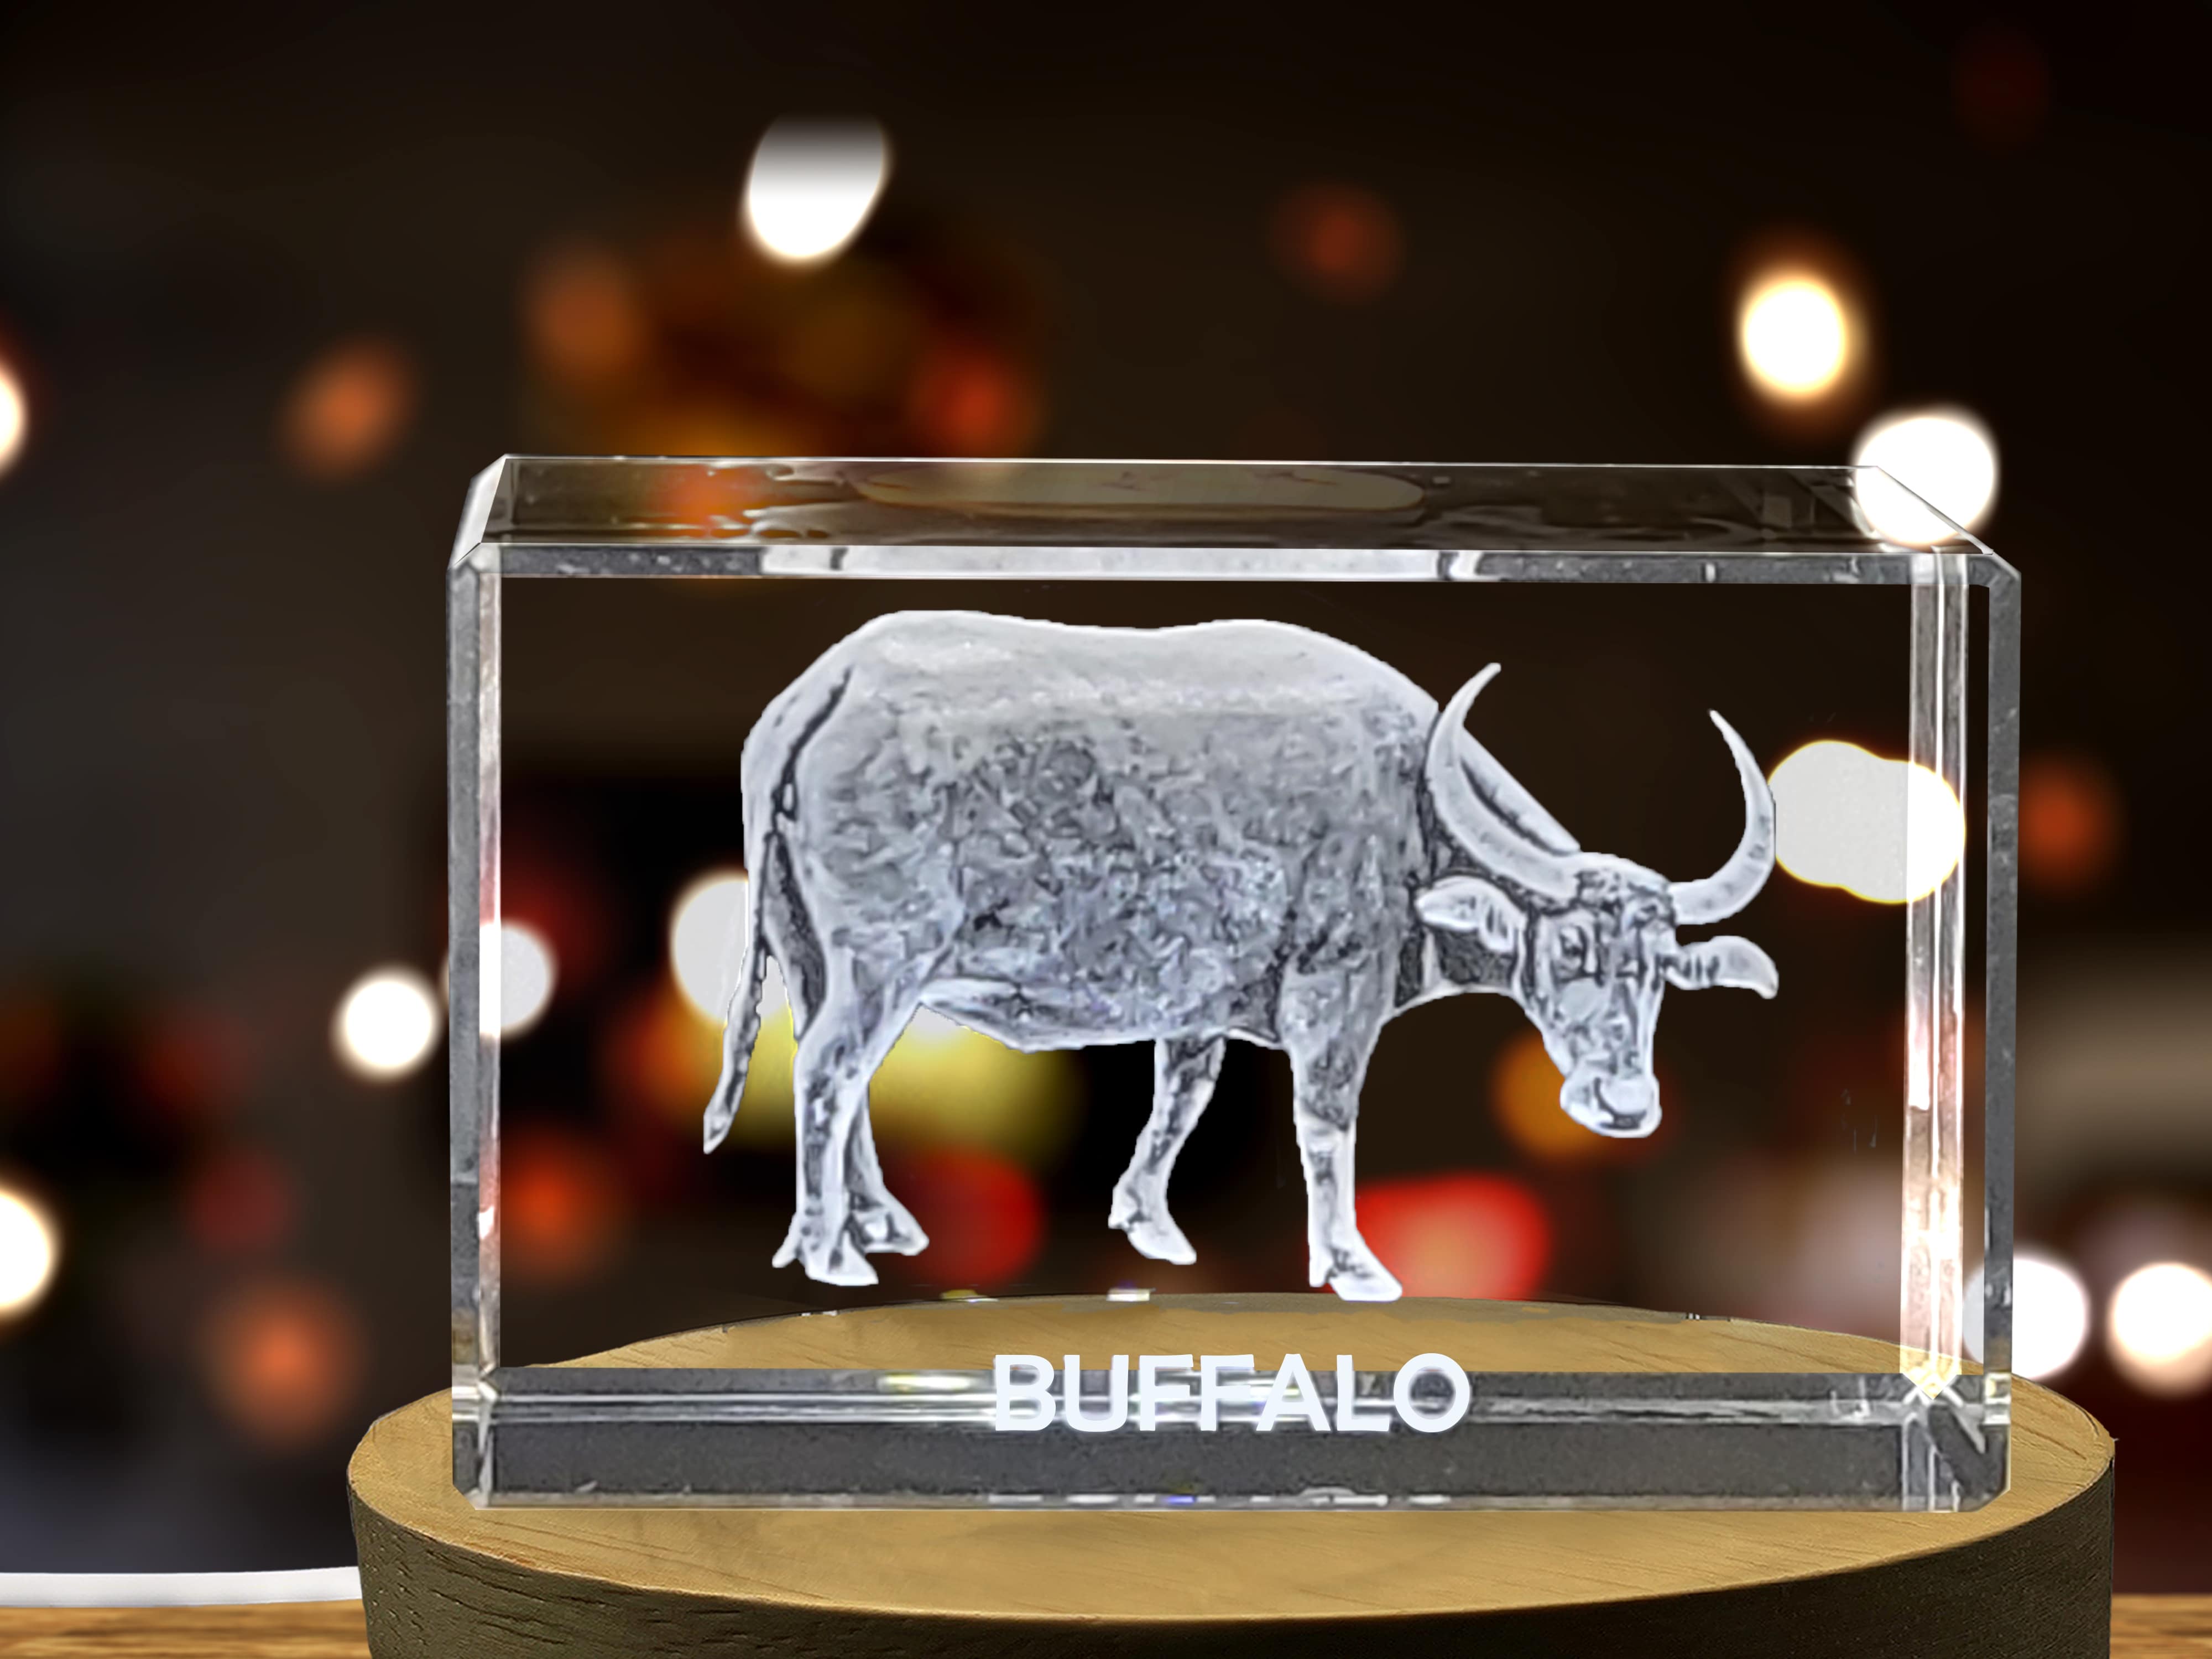 Unique 3D Engraved Crystal with Buffalo Design - Perfect Gift for Animal Lovers A&B Crystal Collection